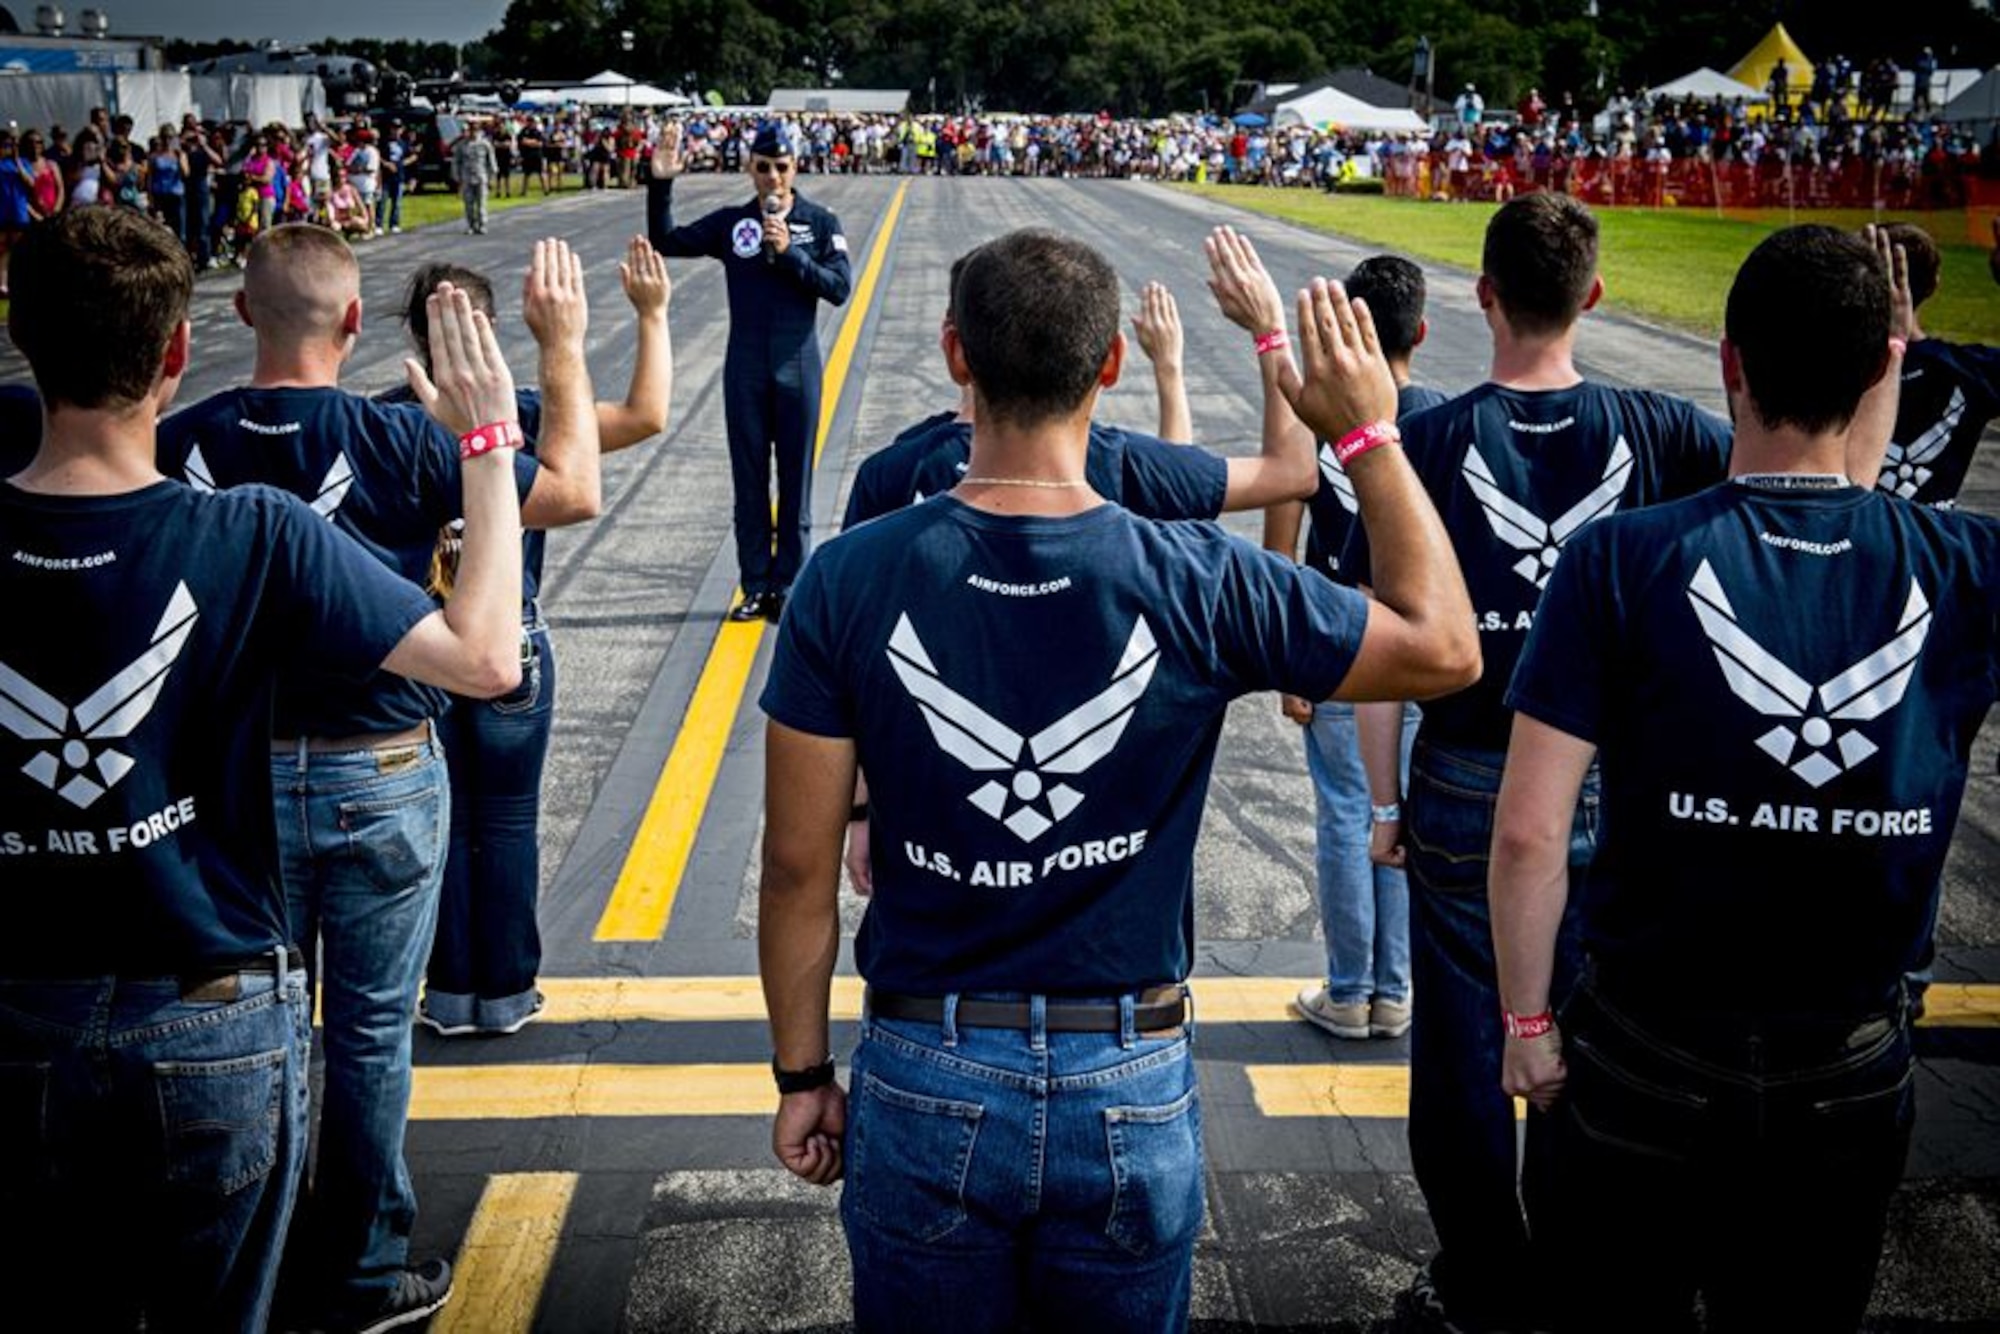 New Airmen take the Oath of Enlistment to at an airshow in  Lakeland, Fla., April, 25, 2015. An Air Education and Training Command oversight initiative works to protect Airmen in training following the discovery of unprofessional behavior within the Basic Military Training environment.  Through this initiative, Air Force leaders help ensure better transparency and accountability and gather information necessary to proactively shape professional expectations for its Airmen. 
